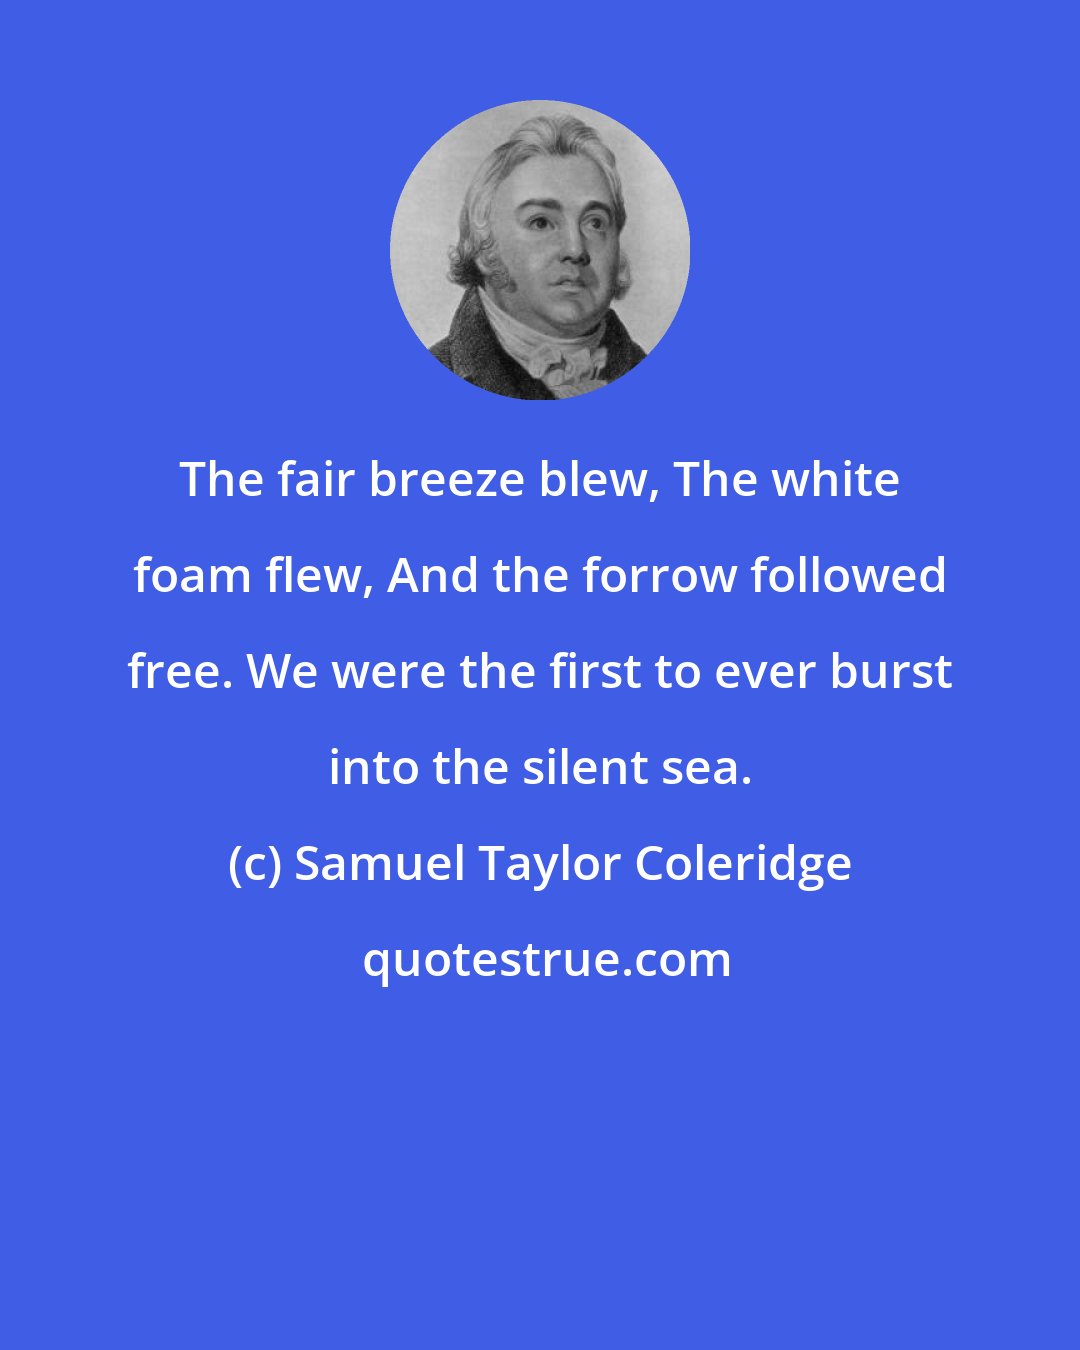 Samuel Taylor Coleridge: The fair breeze blew, The white foam flew, And the forrow followed free. We were the first to ever burst into the silent sea.